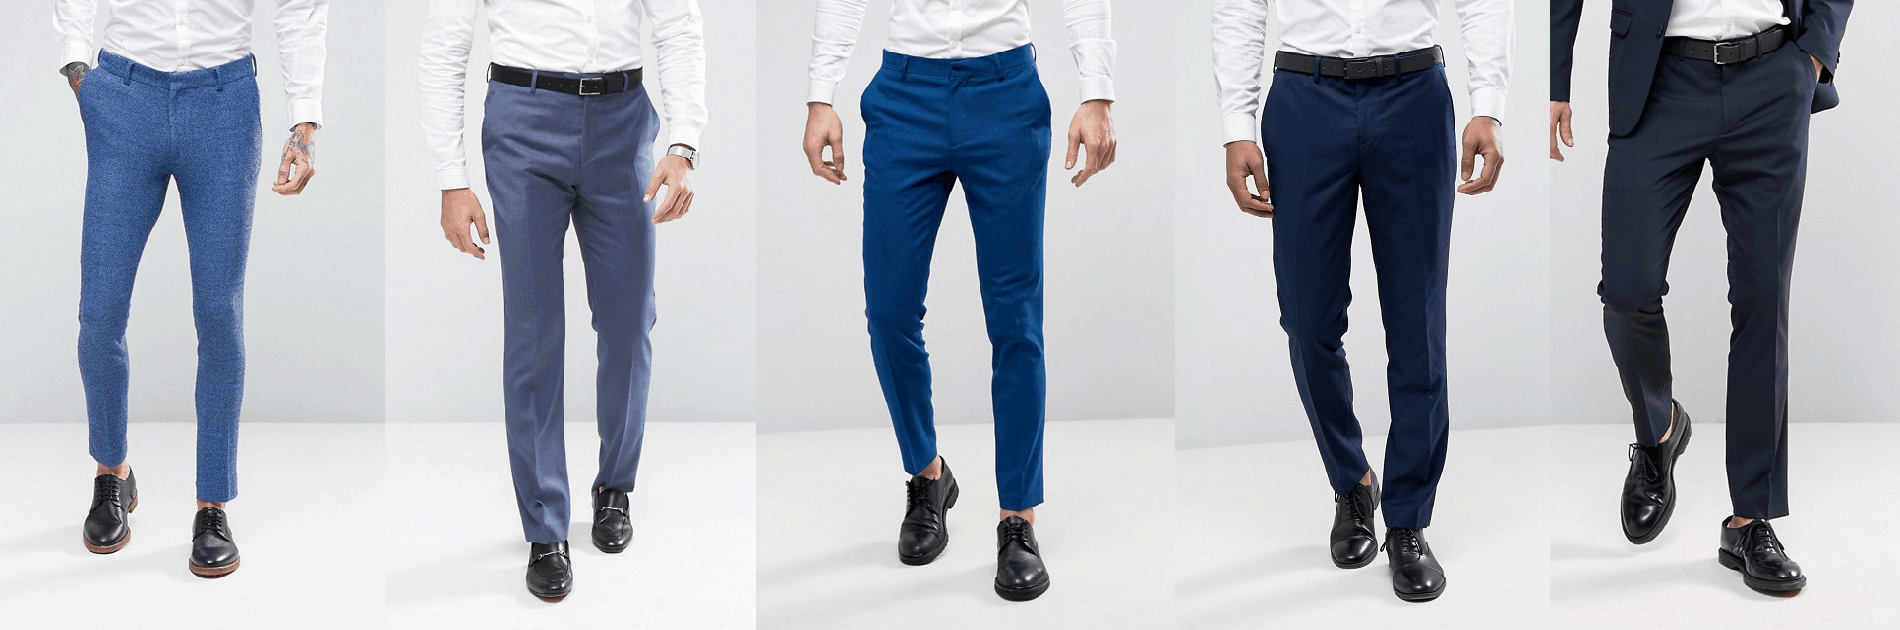 Different shades of blue dress pants for the occasion